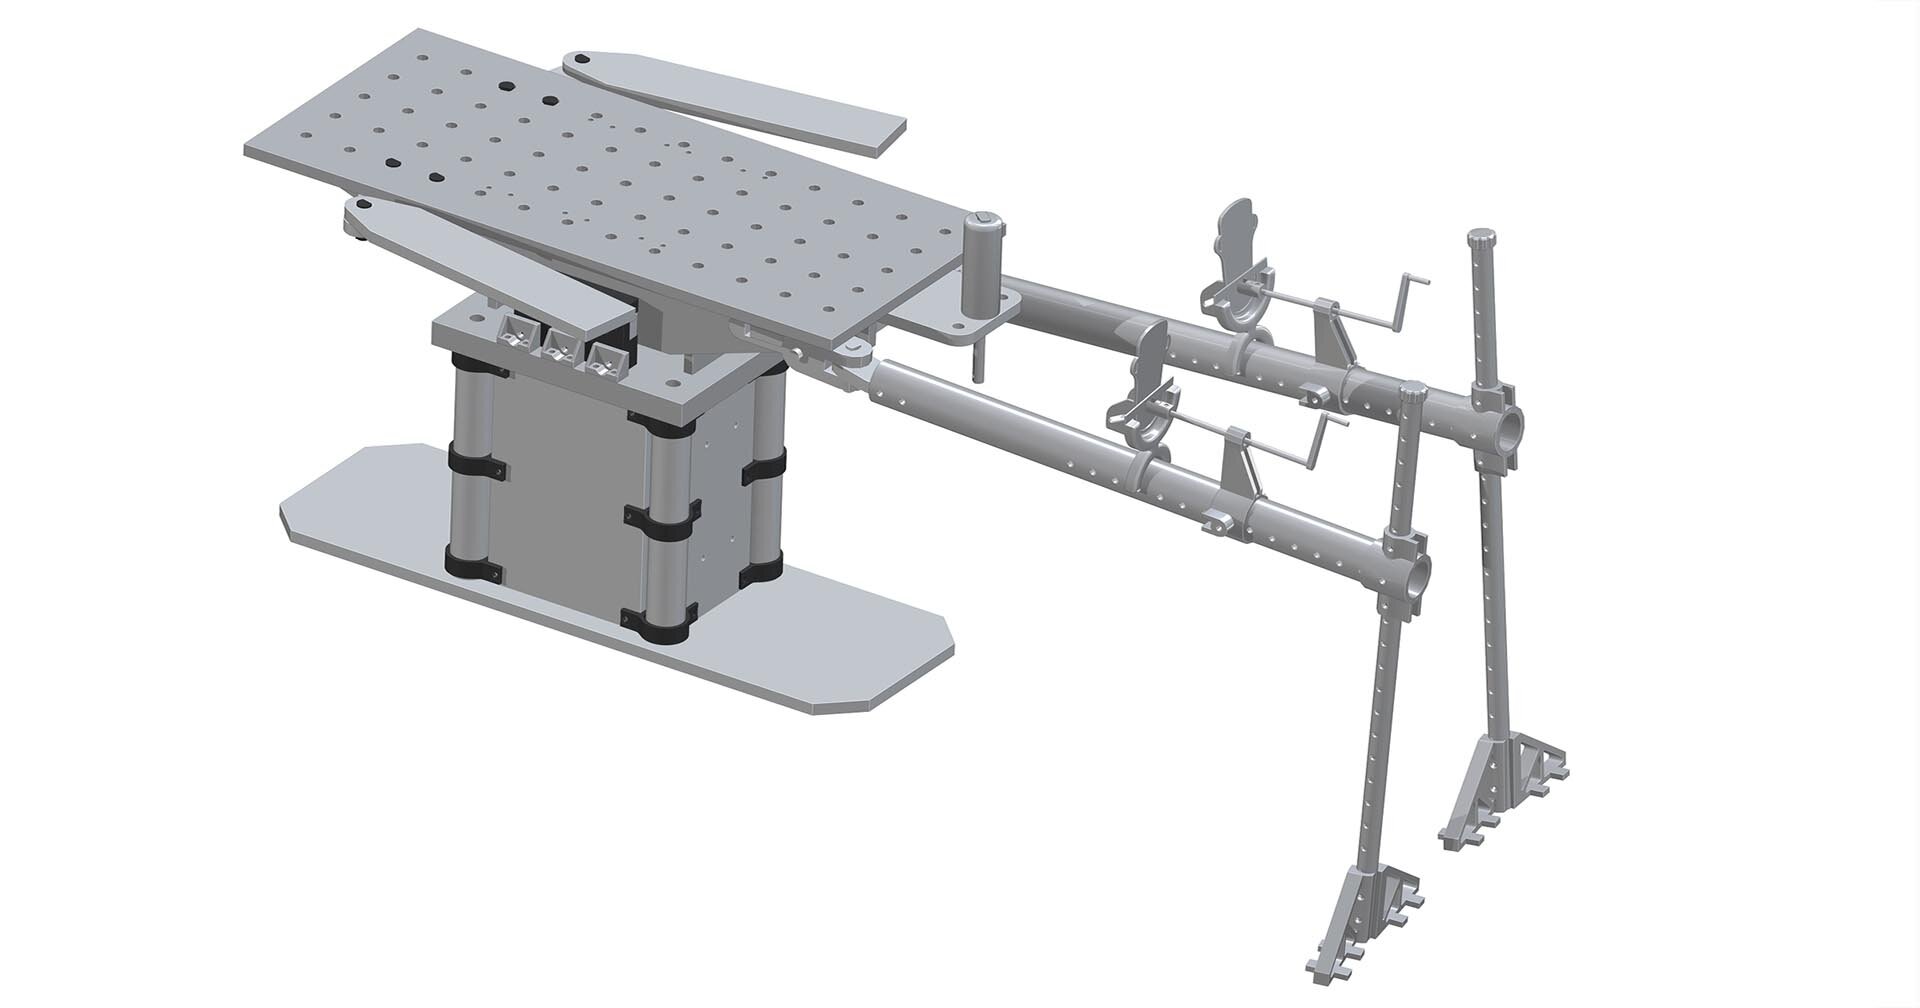 #Open-source tech enables 3D-printed surgical table